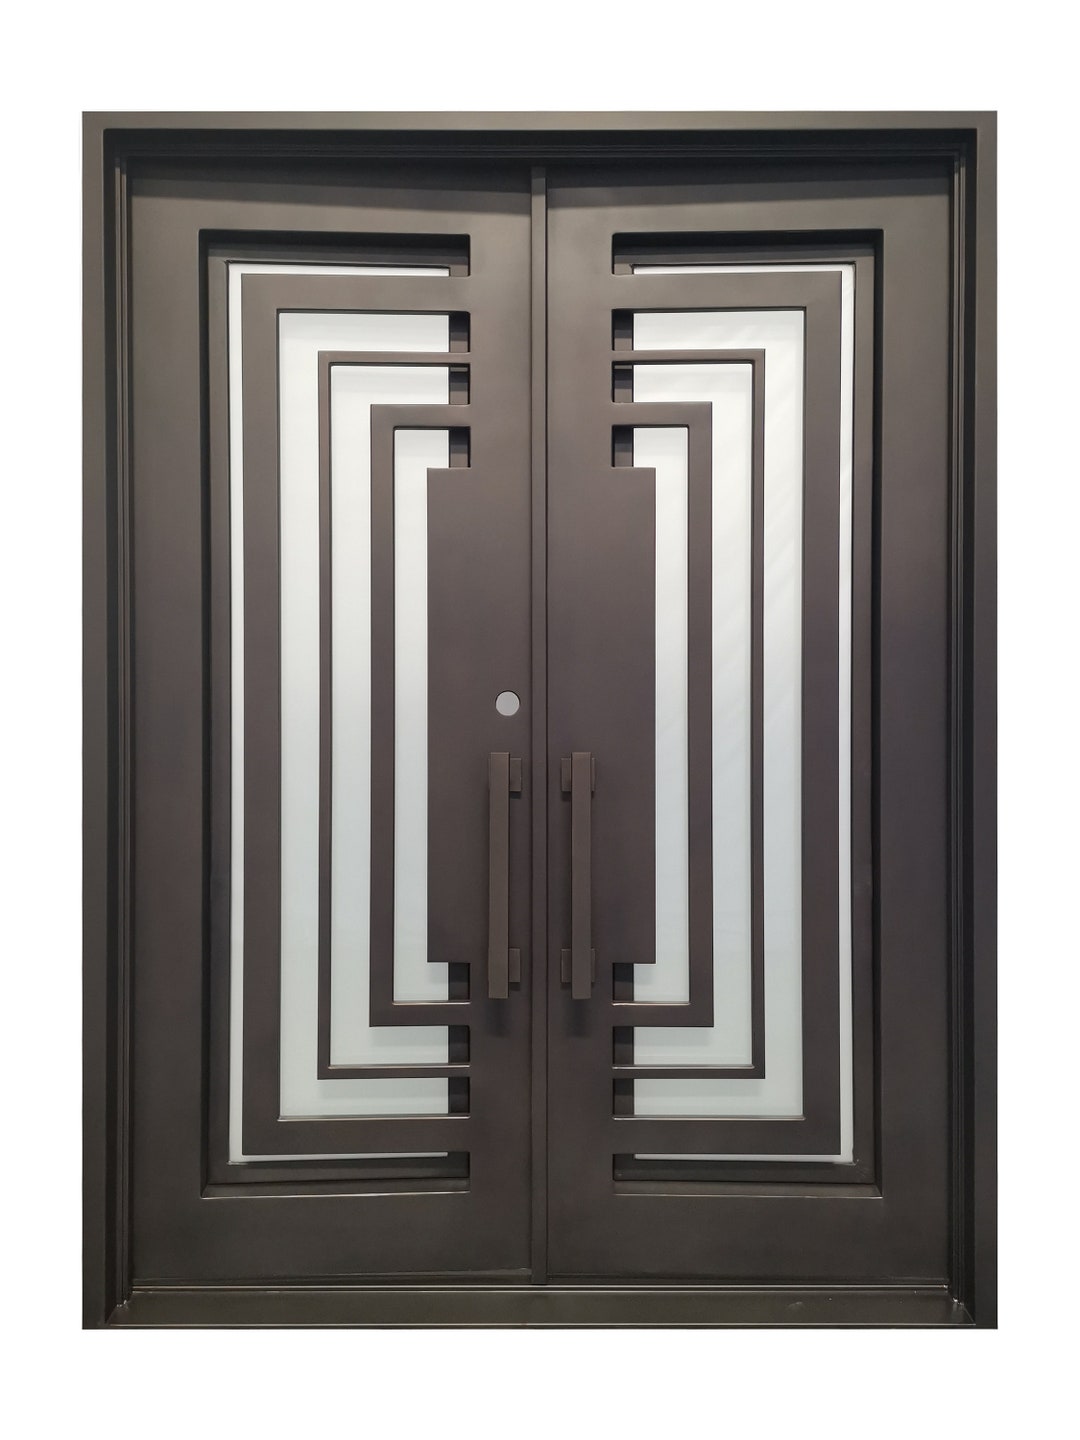 Bellaire Model Iron Door With Frosted Glass Dark Bronze Finish - Etsy